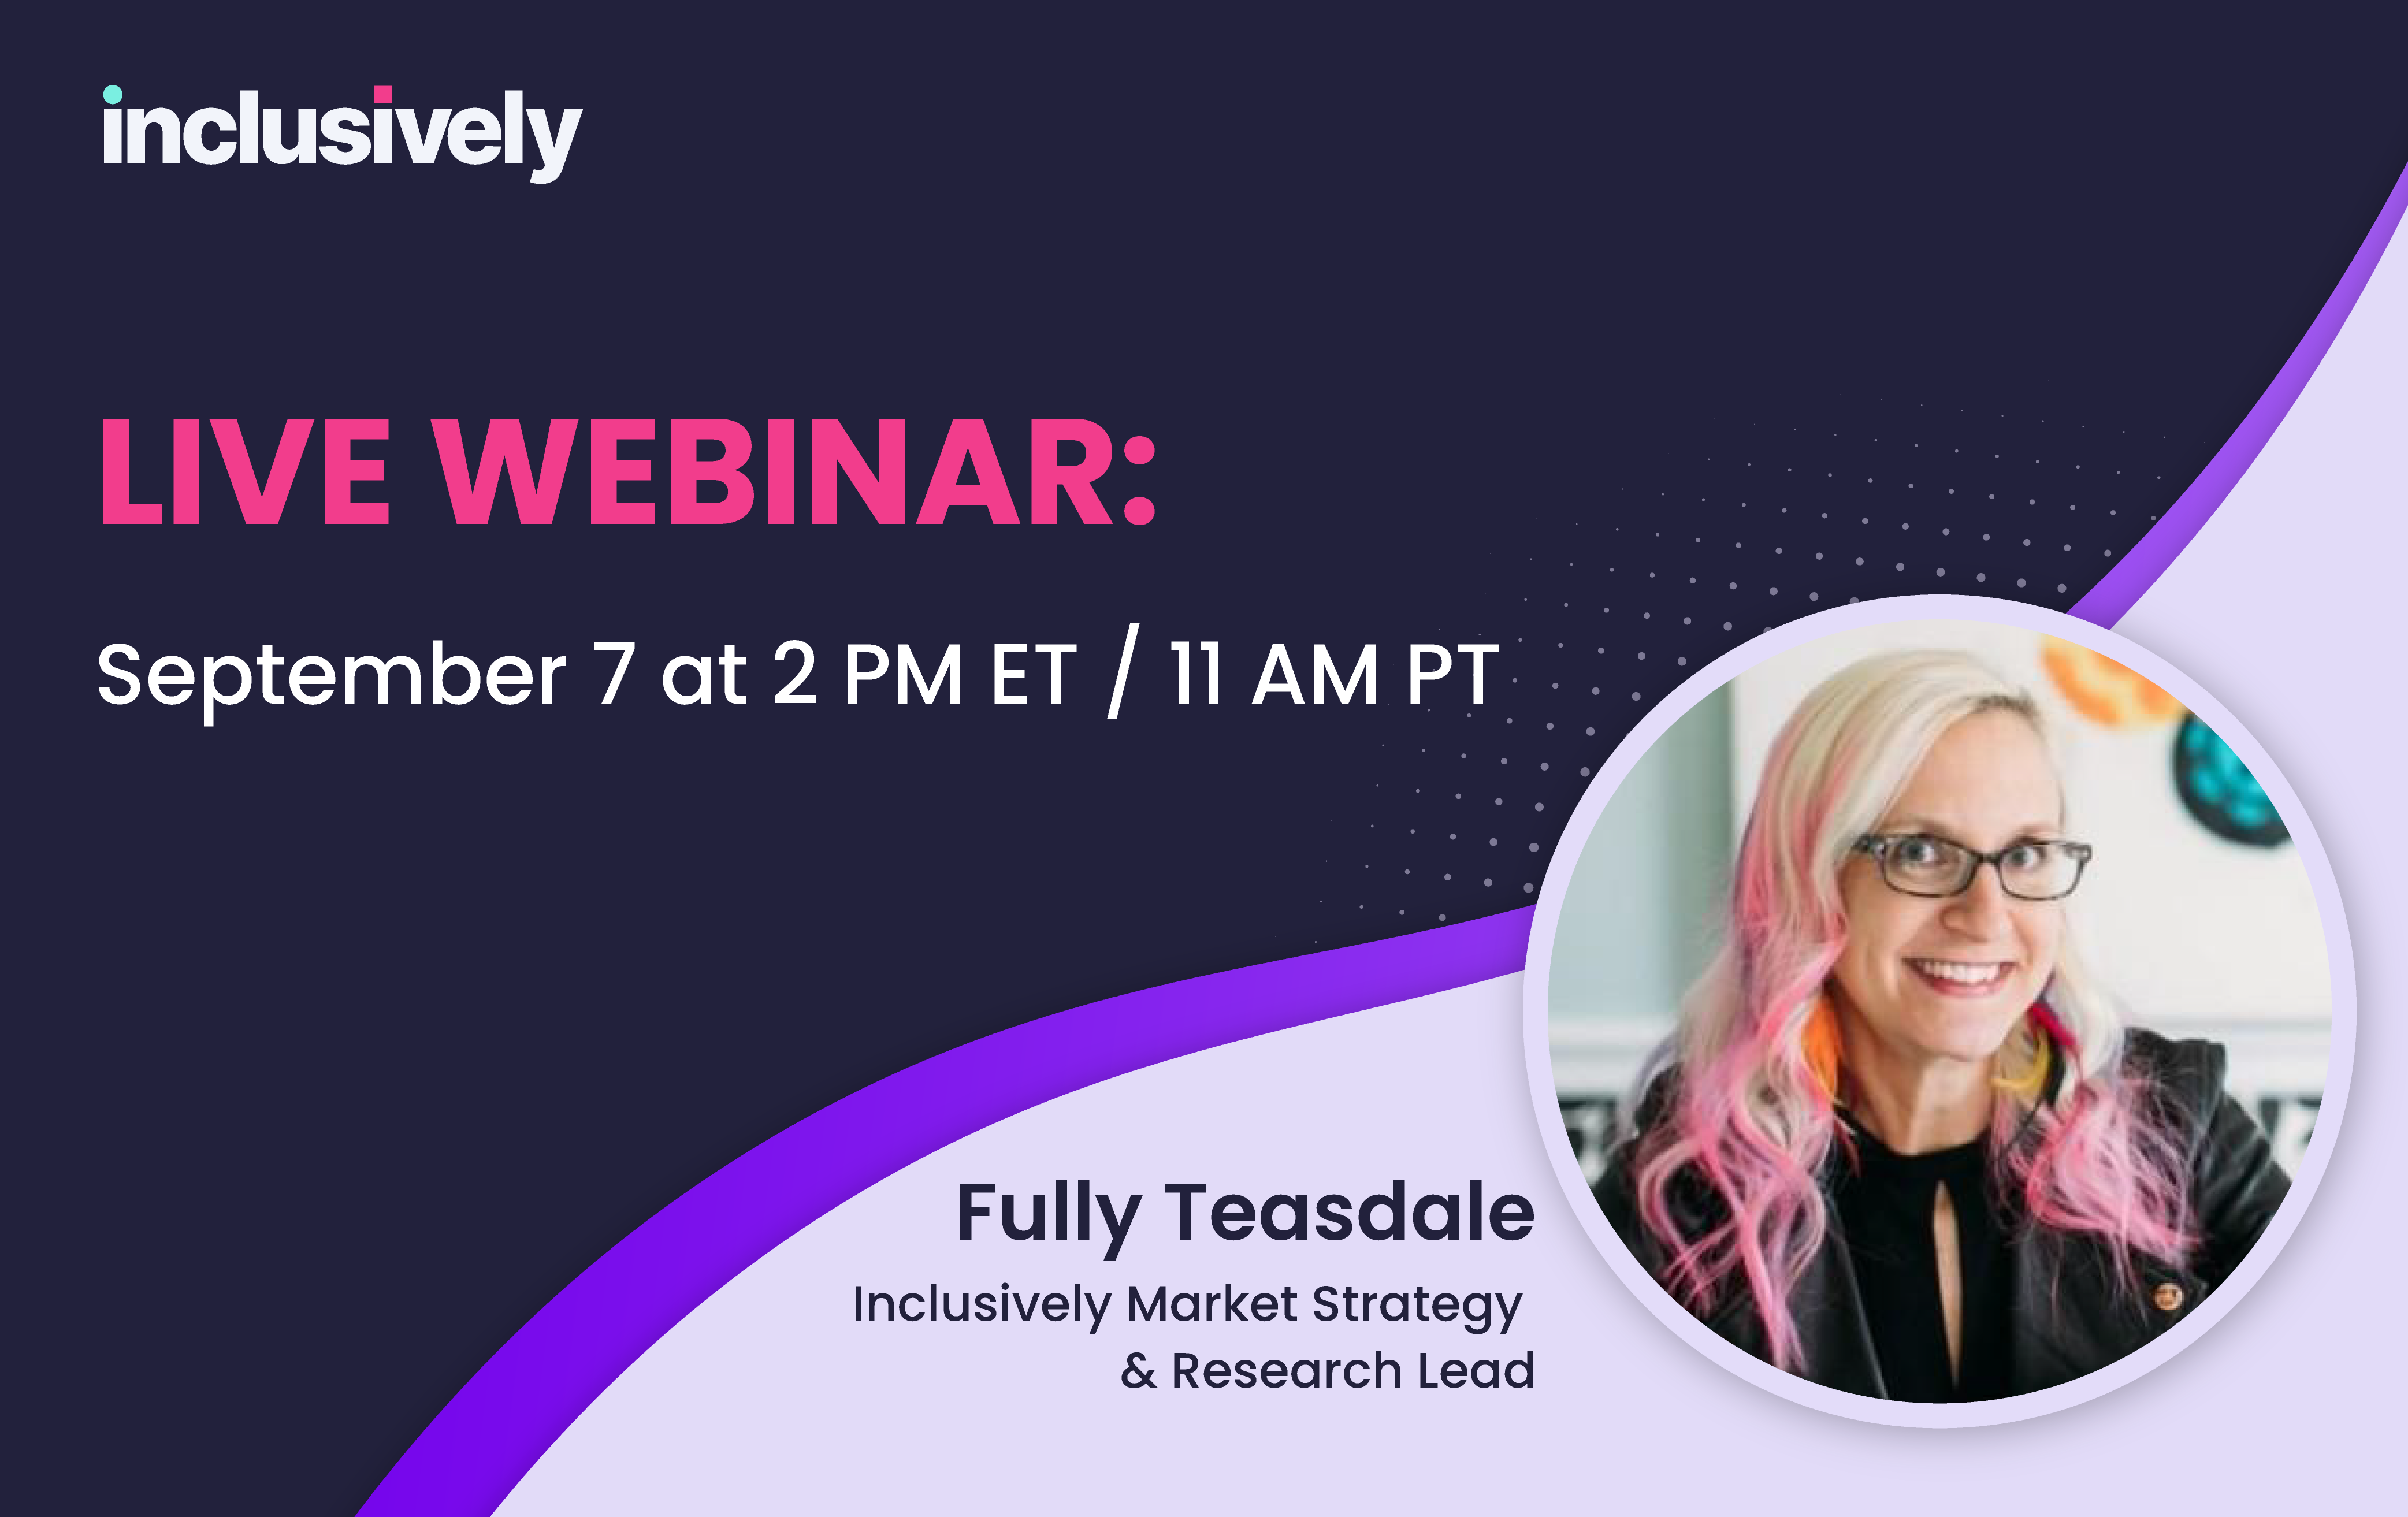 On-demand webinar, Fully Teasdale smiling with glasses on